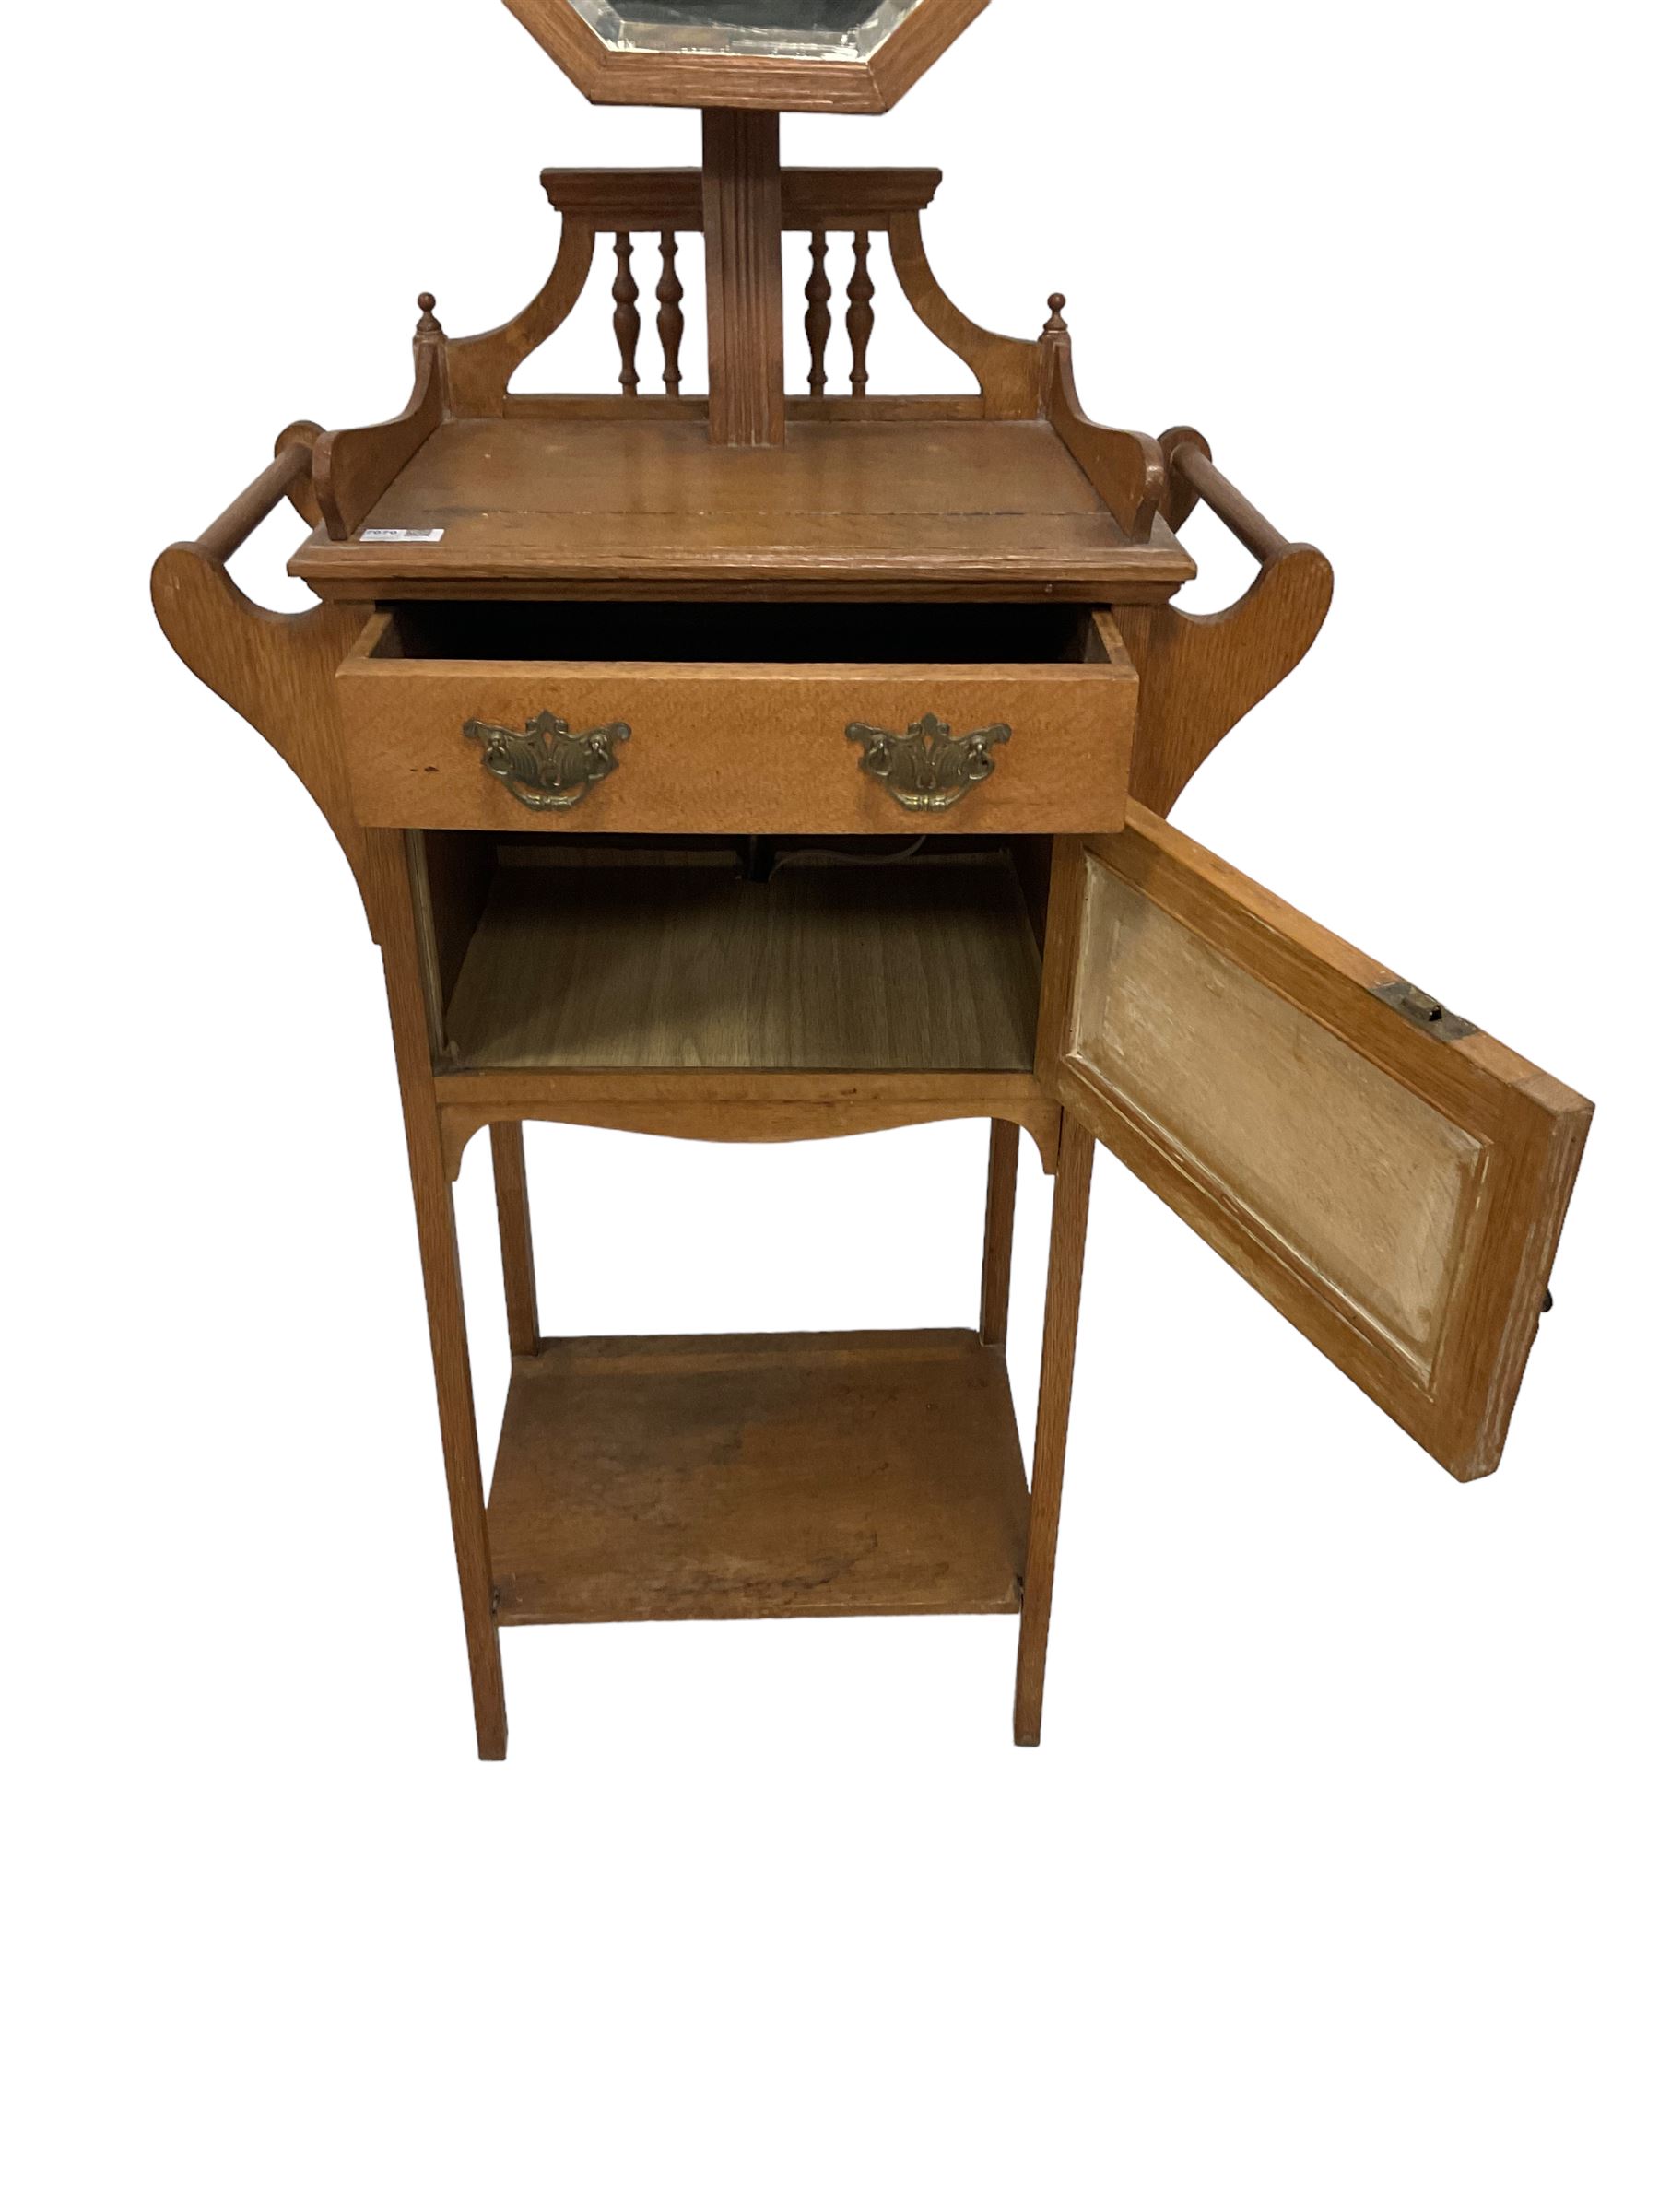 Late 19th to early 20th century oak washstand - Image 4 of 5